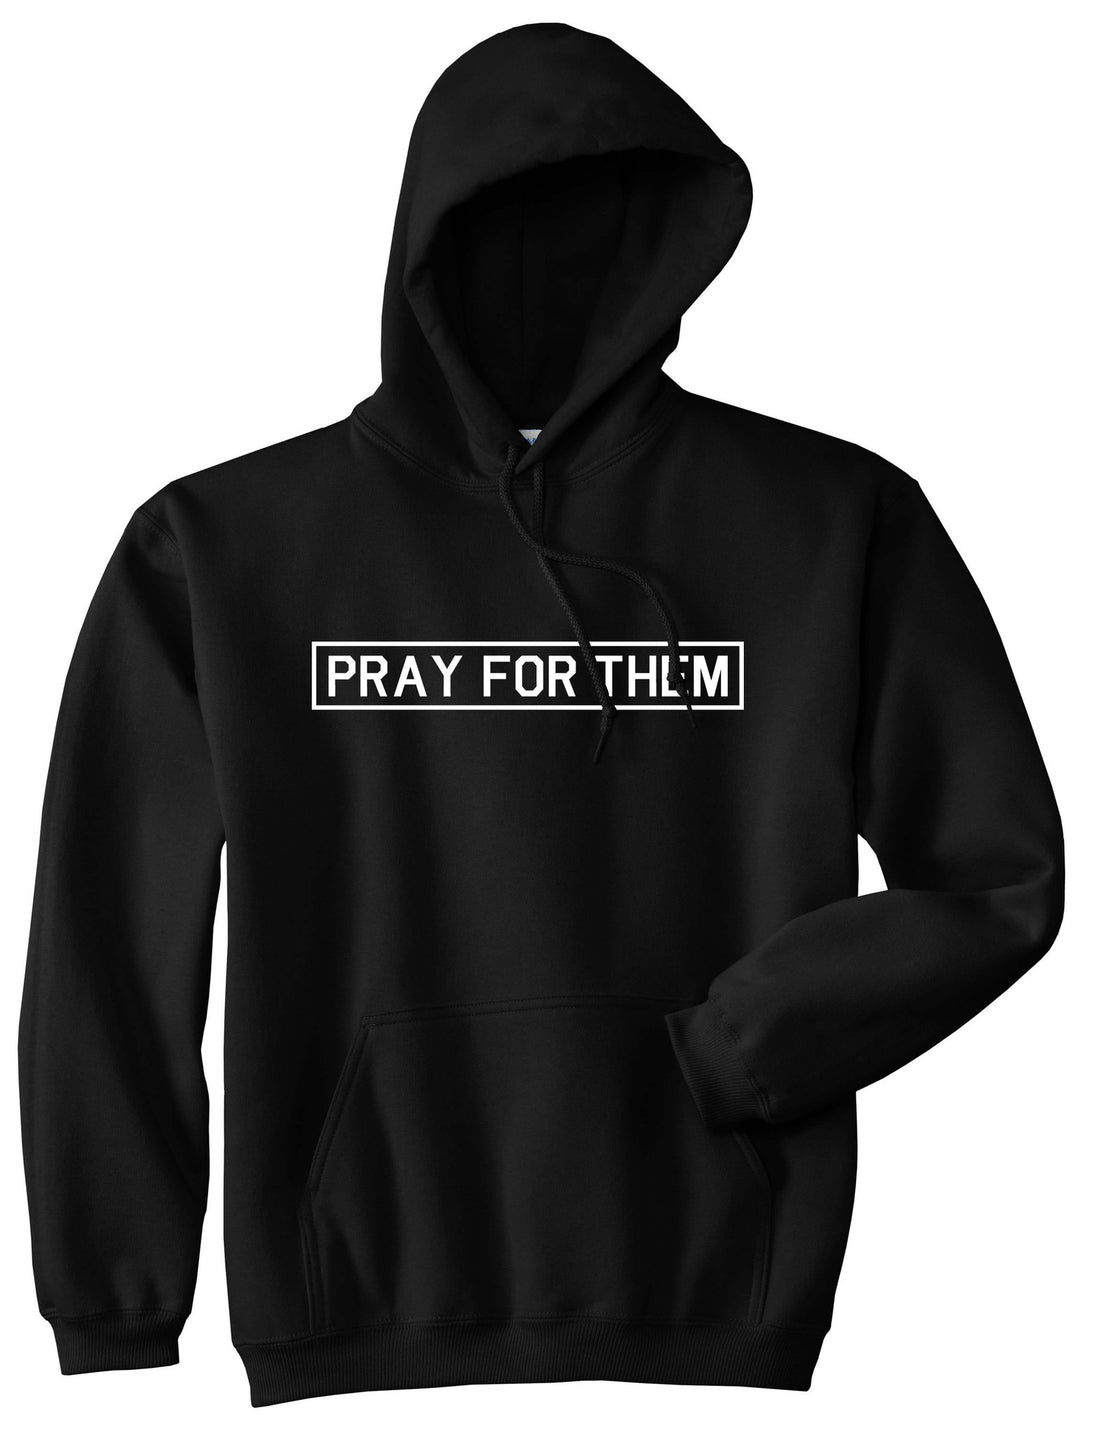 Pray For Them Fall15 Boys Kids Pullover Hoodie Hoody in Black by Kings Of NY